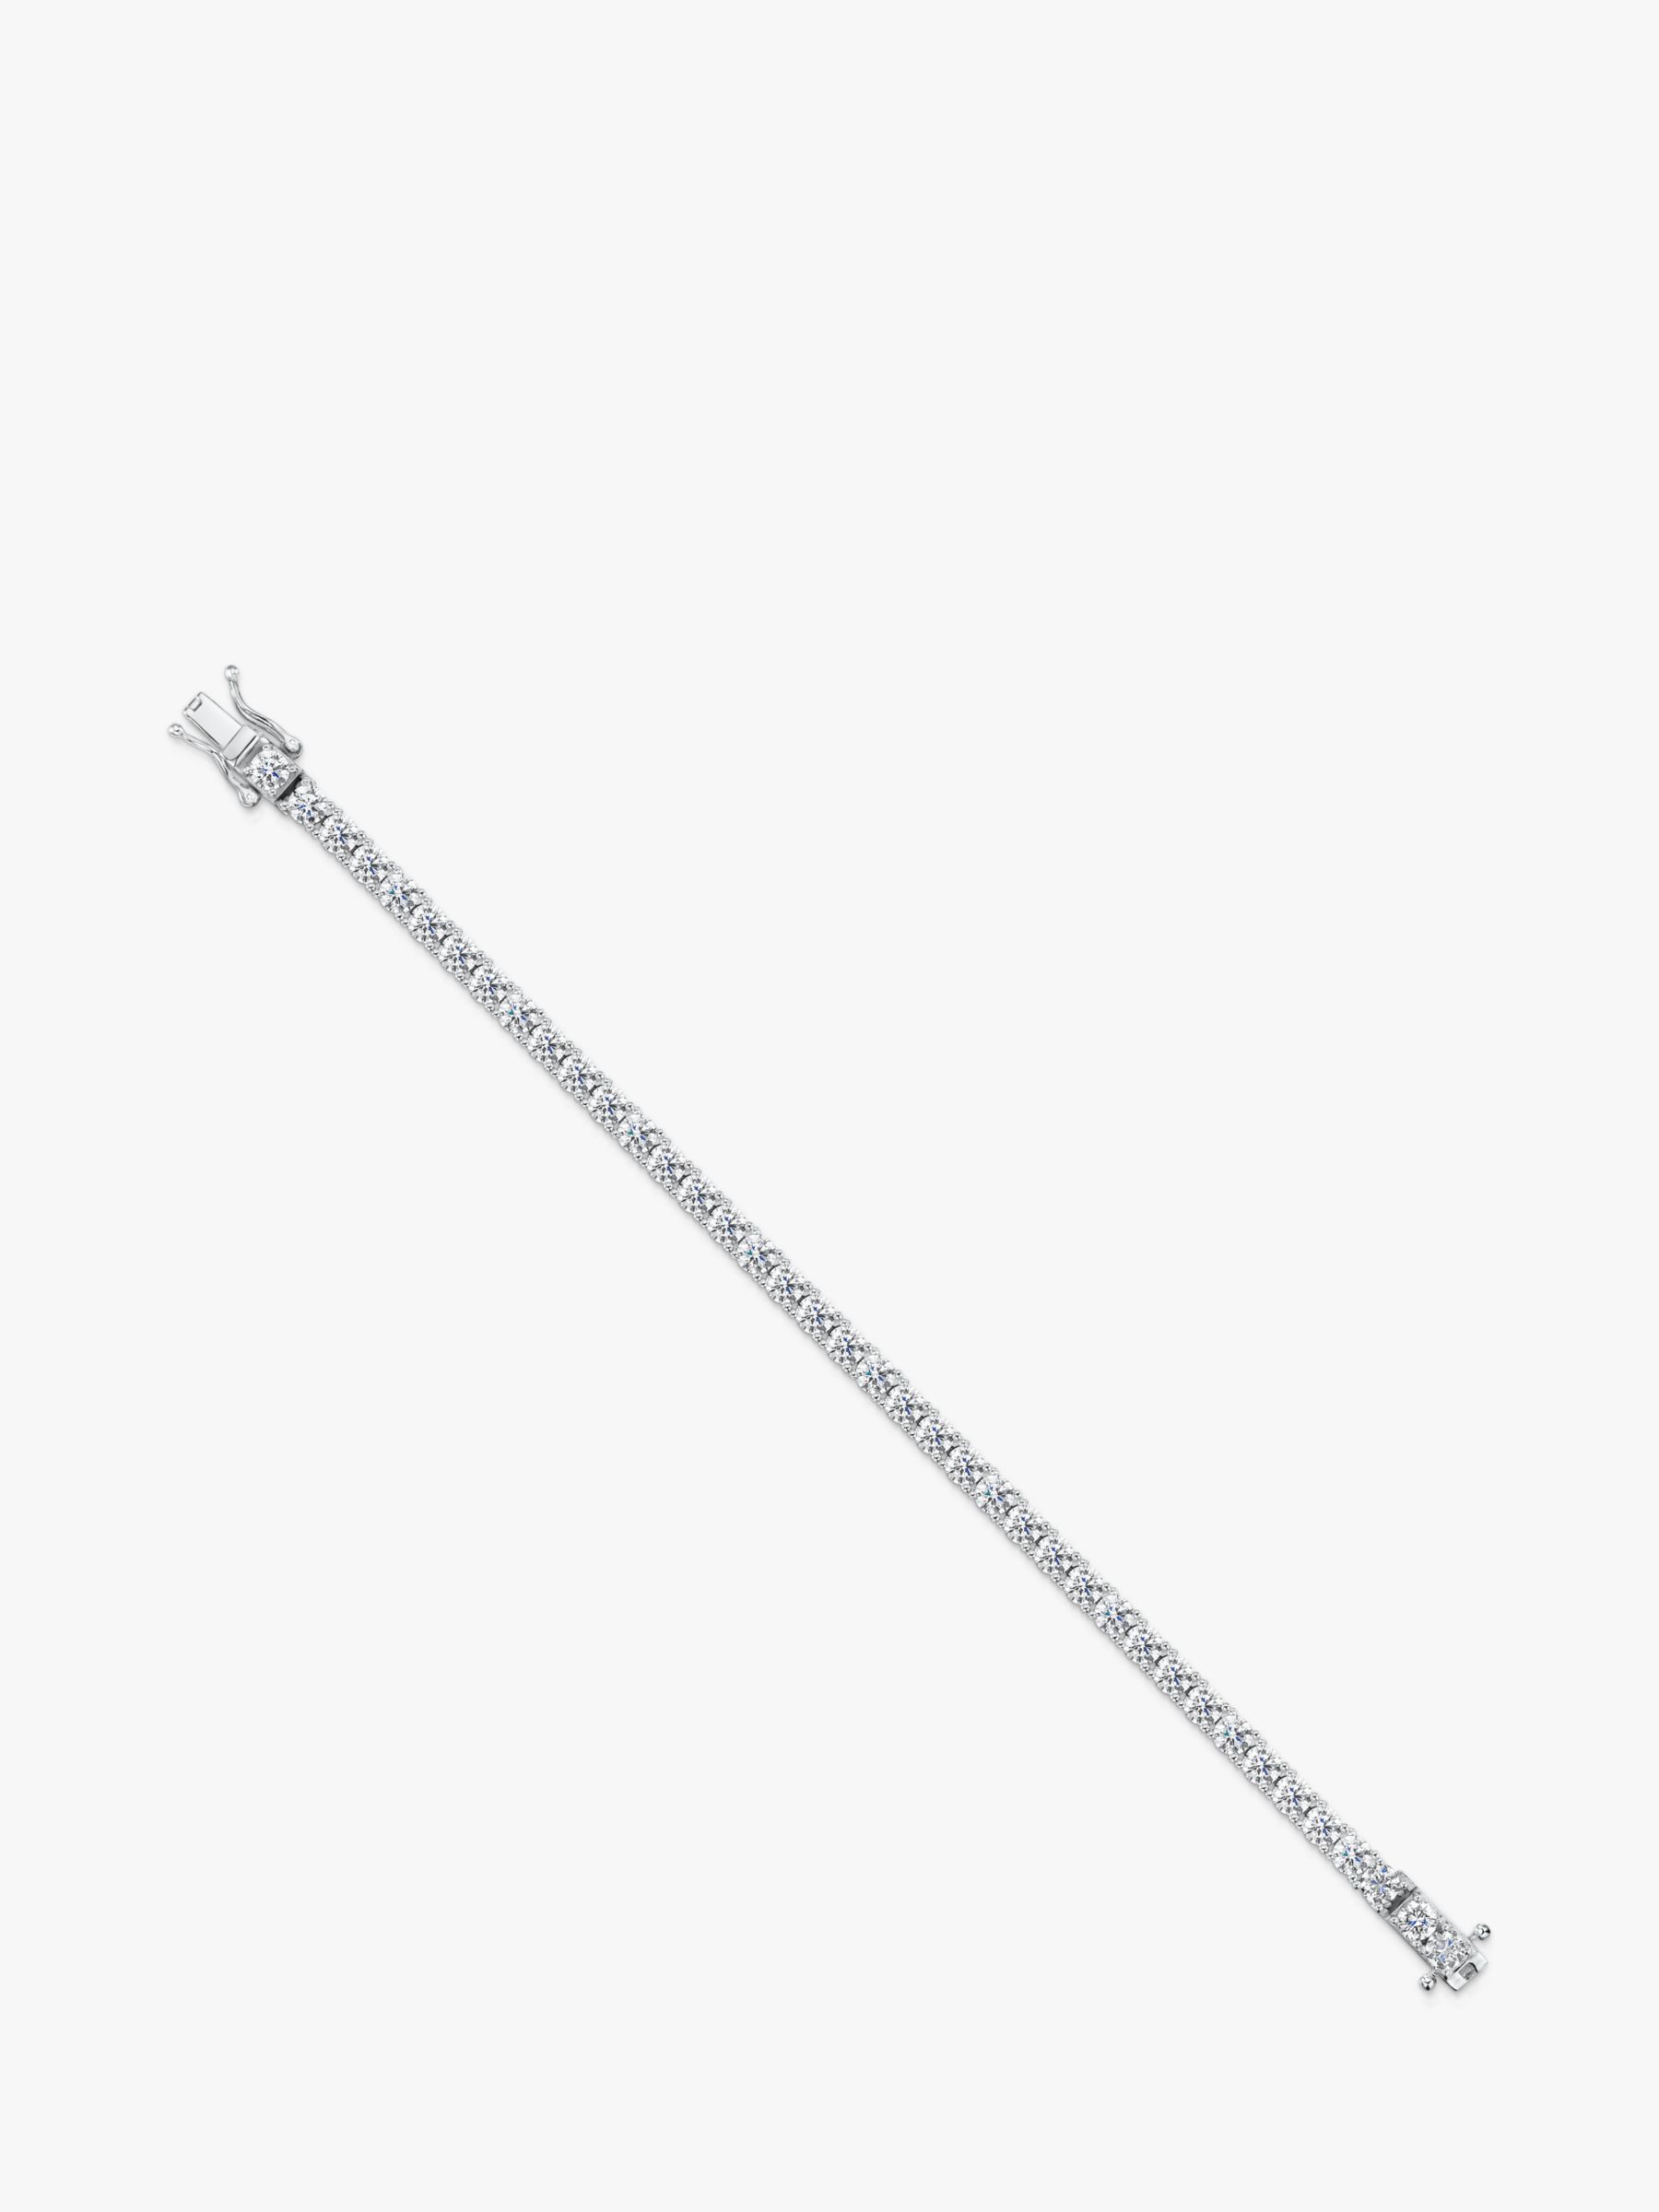 Buy Jools by Jenny Brown Round Cut Cubic Zirconia Tennis Bracelet, Silver Online at johnlewis.com